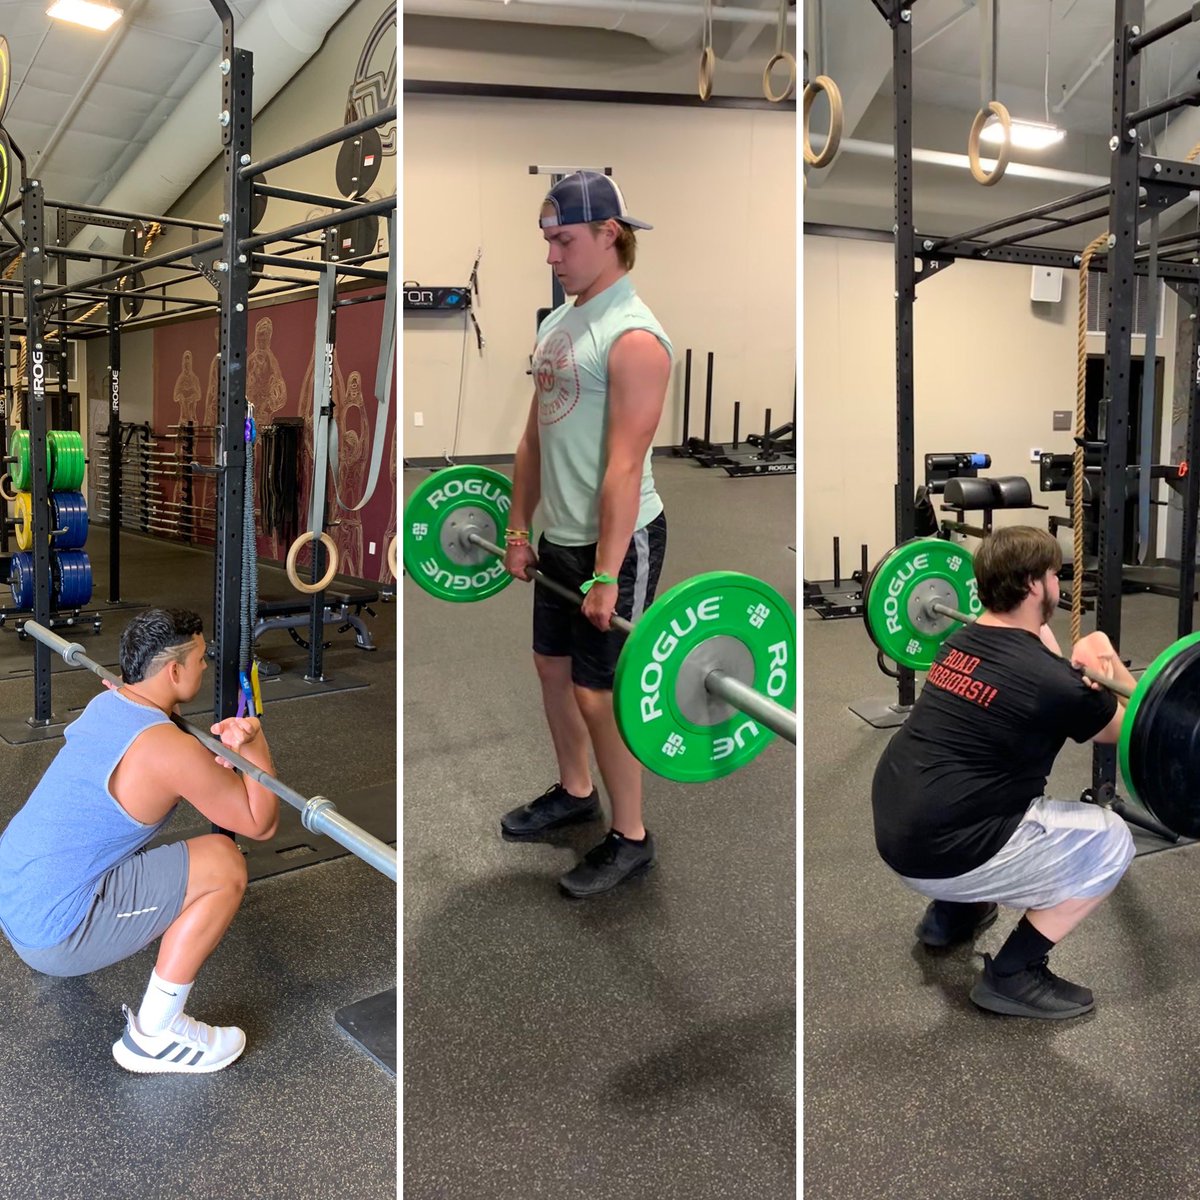 Shoutout to these althletes who continued to work on their mobility during the quarantine!! 🏋🏽‍♂️ 💪🏽@cheek_carson #movewell #strengthandconditioning #onedayatatime #athletes